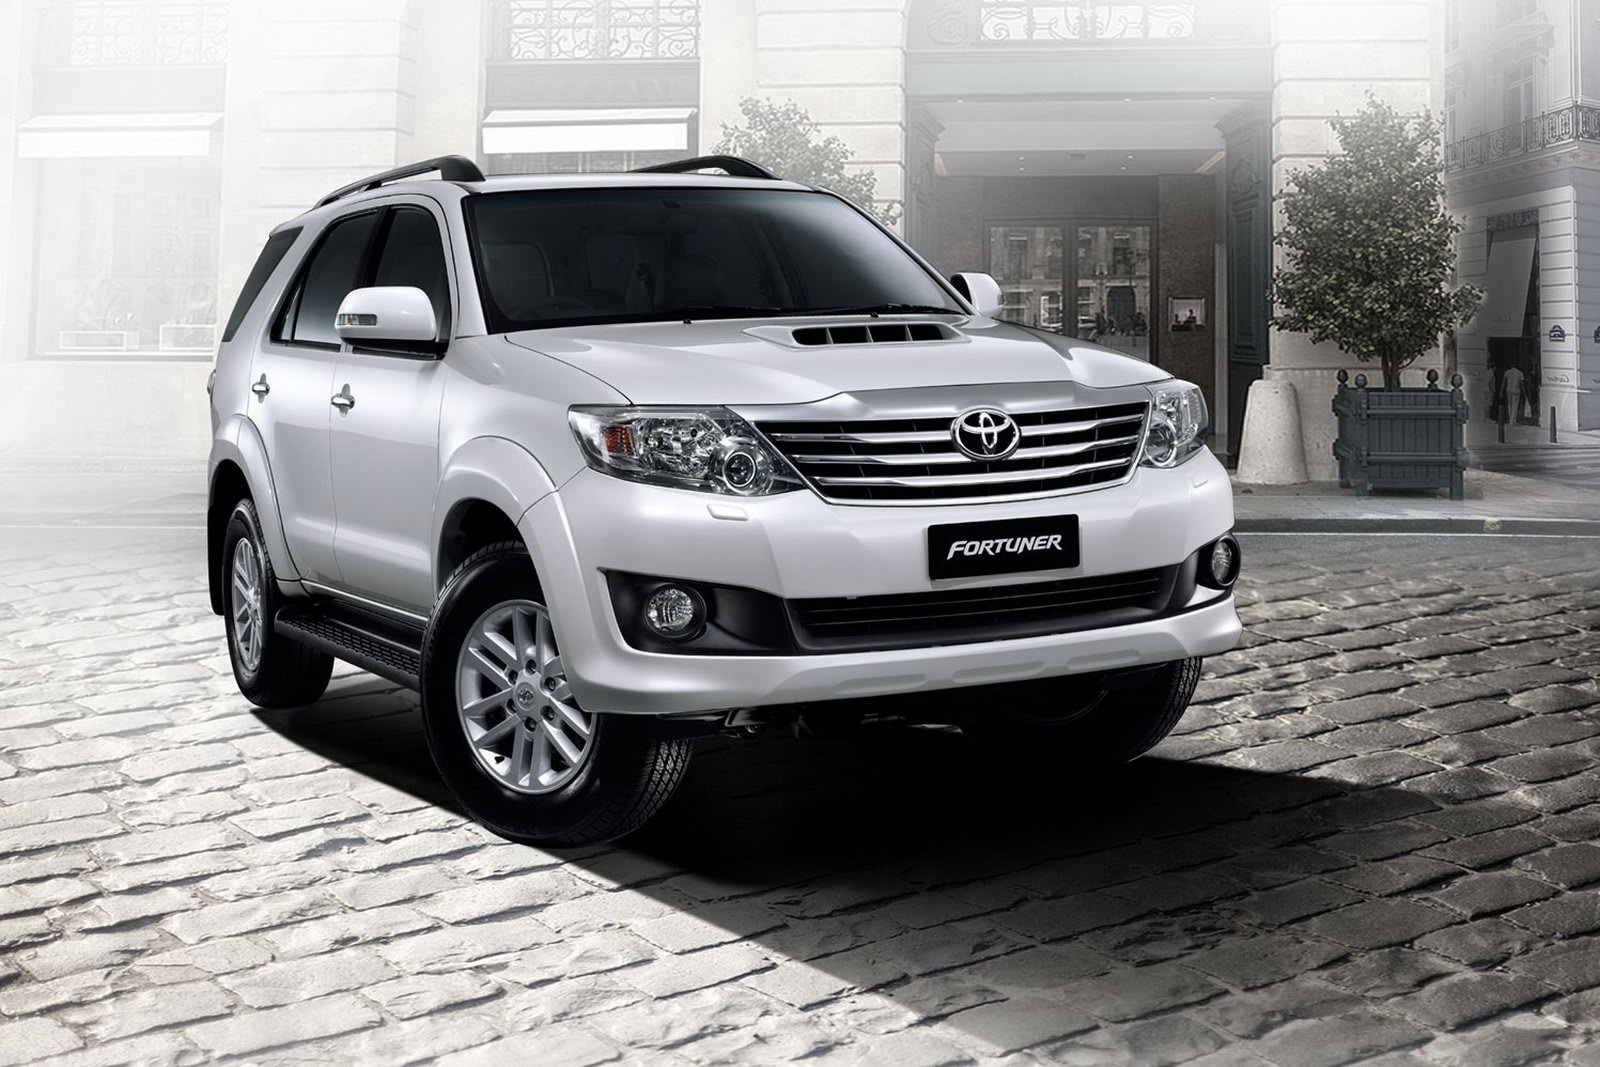 Best Toyota Fortuner Wallpapers part6 Best Cars HD